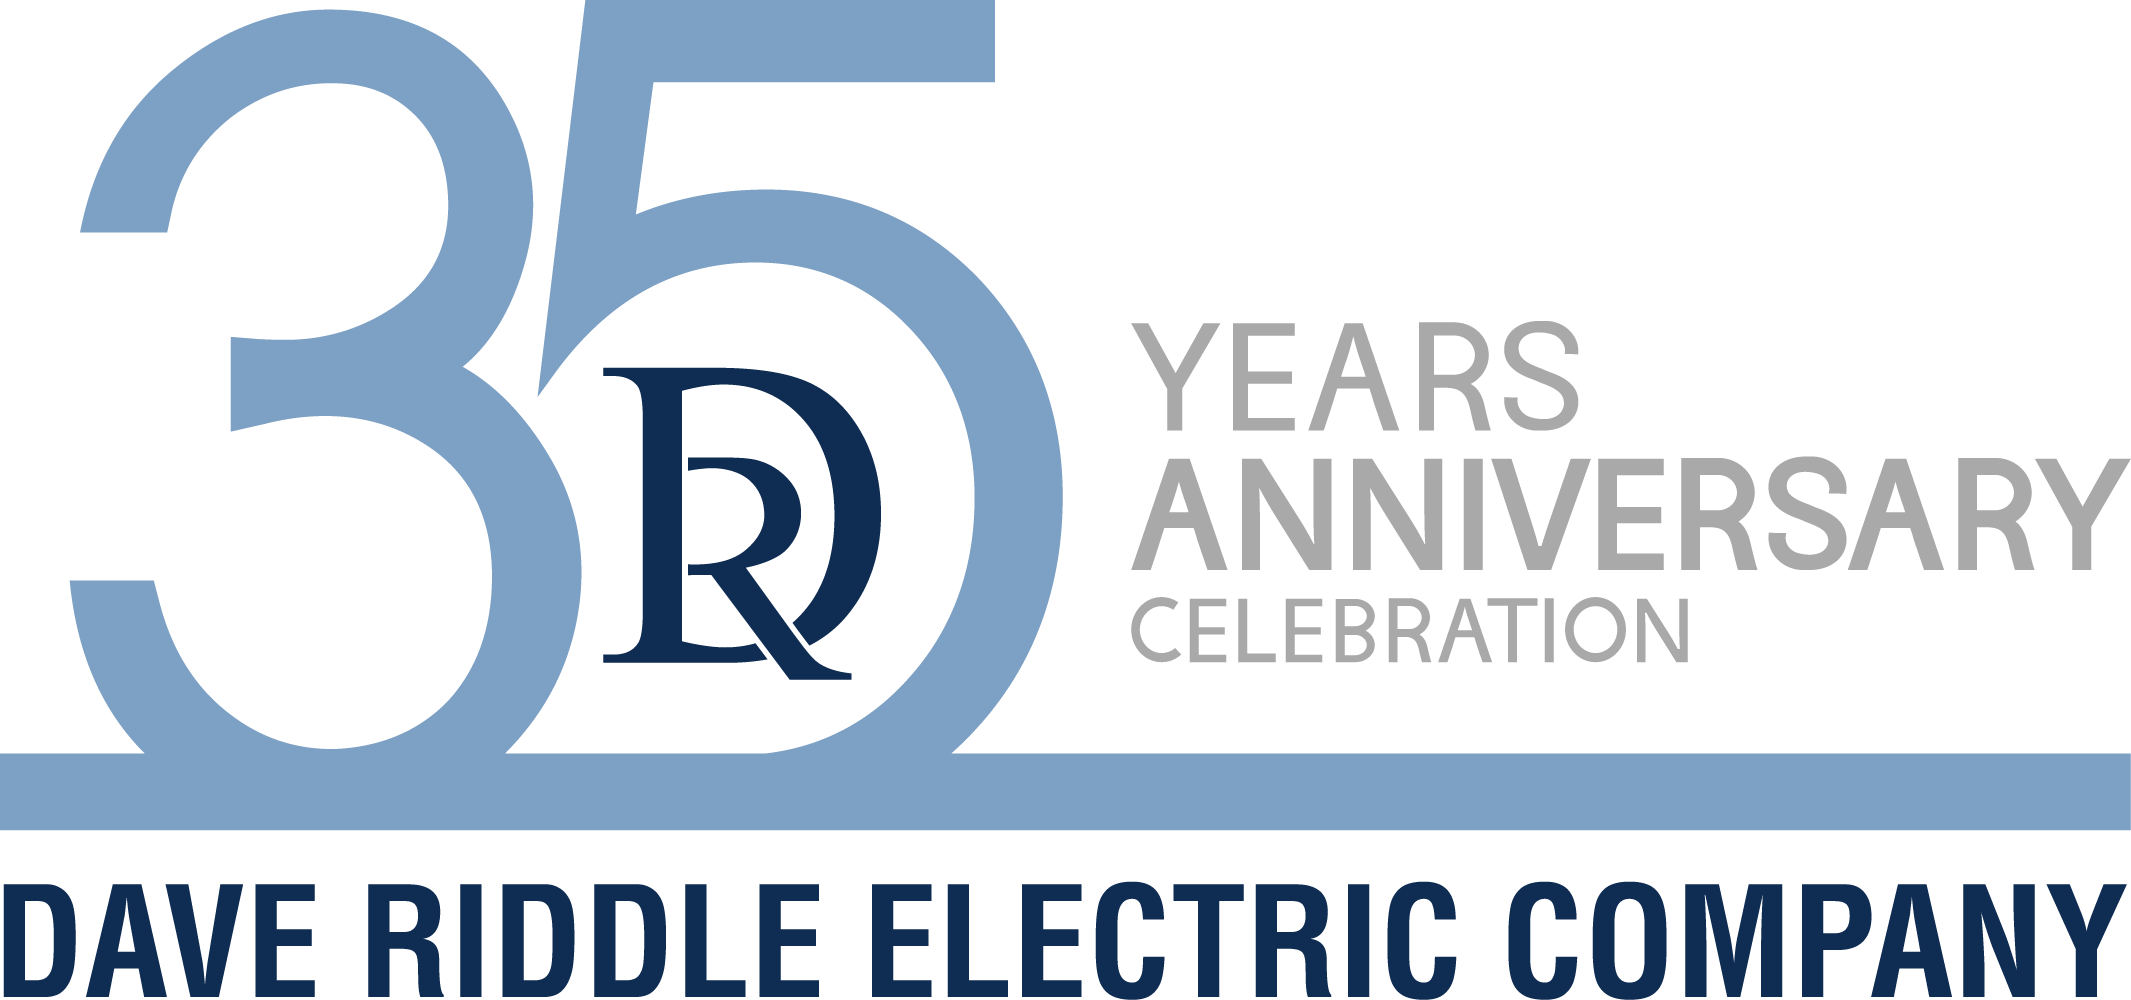 Riddle Electric